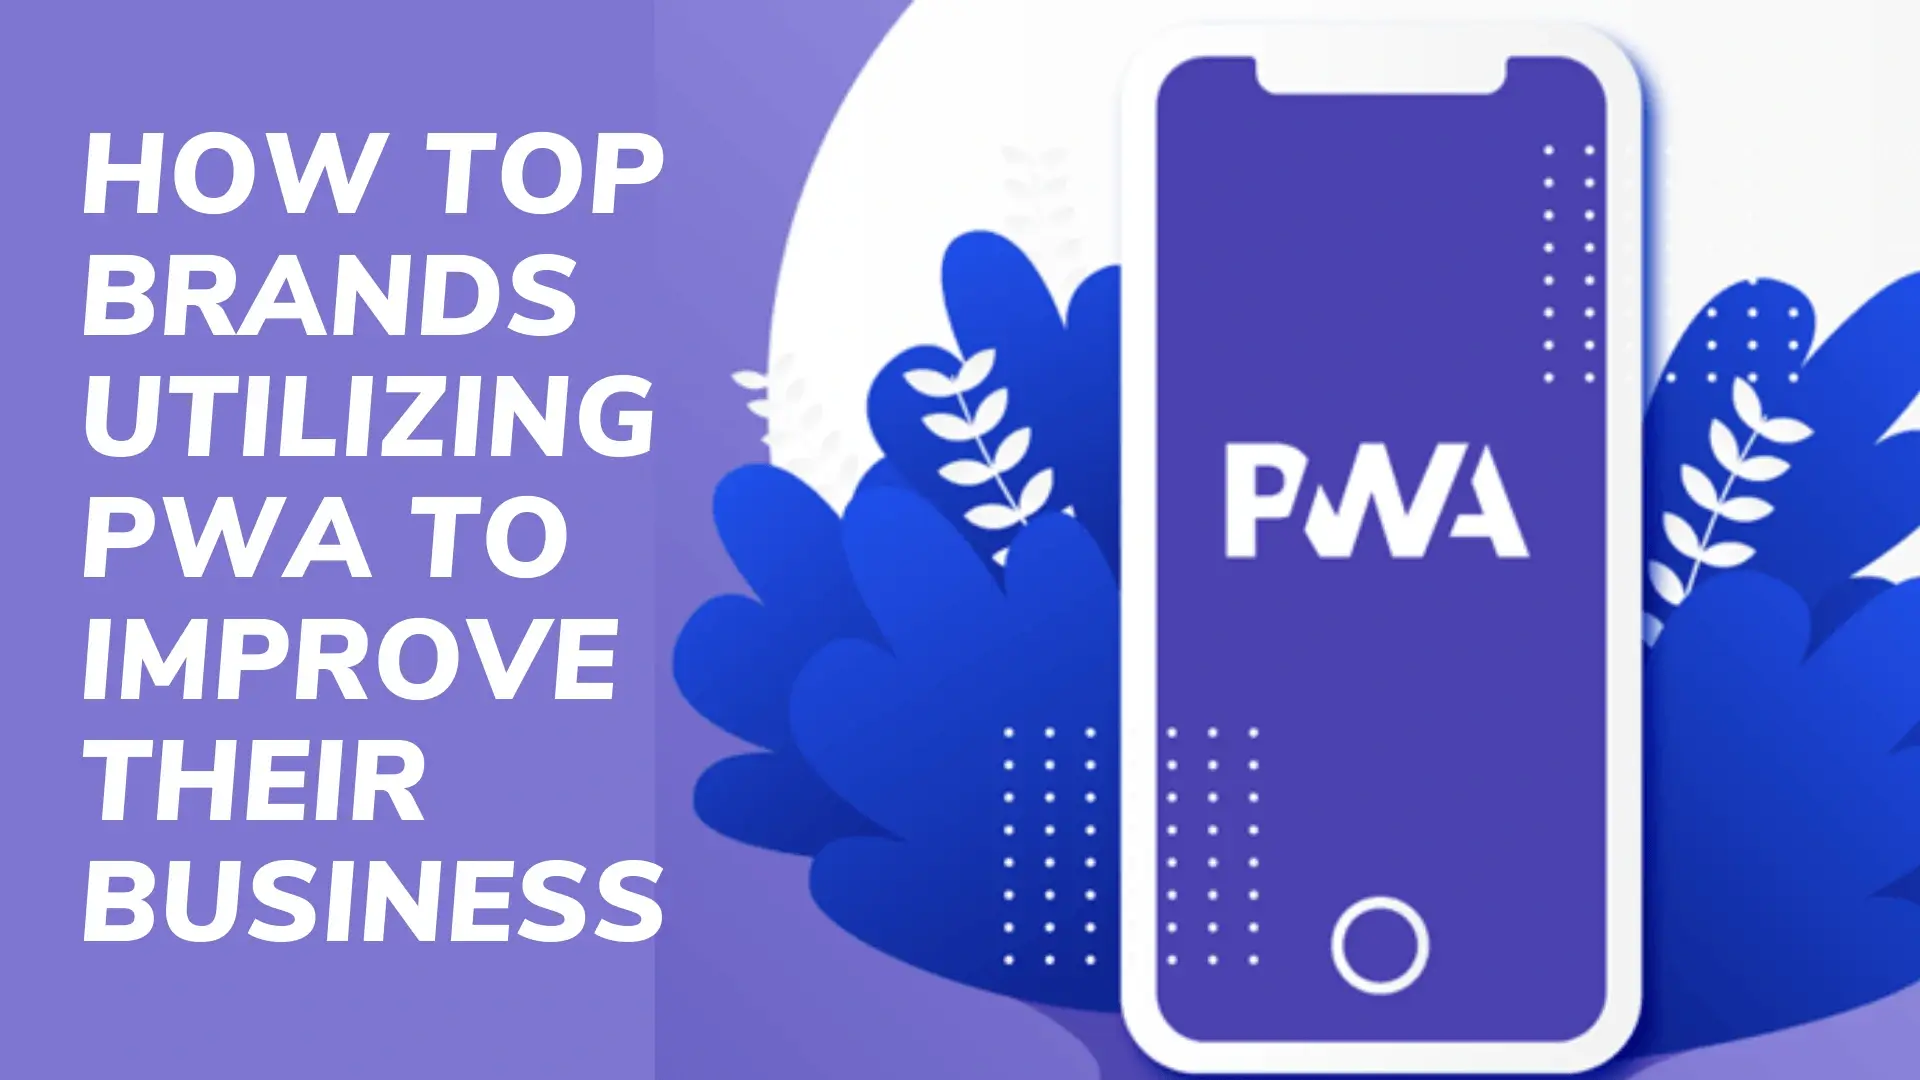 How-Top-Brands-Utilizing-PWA-to-Improve-Their-Business